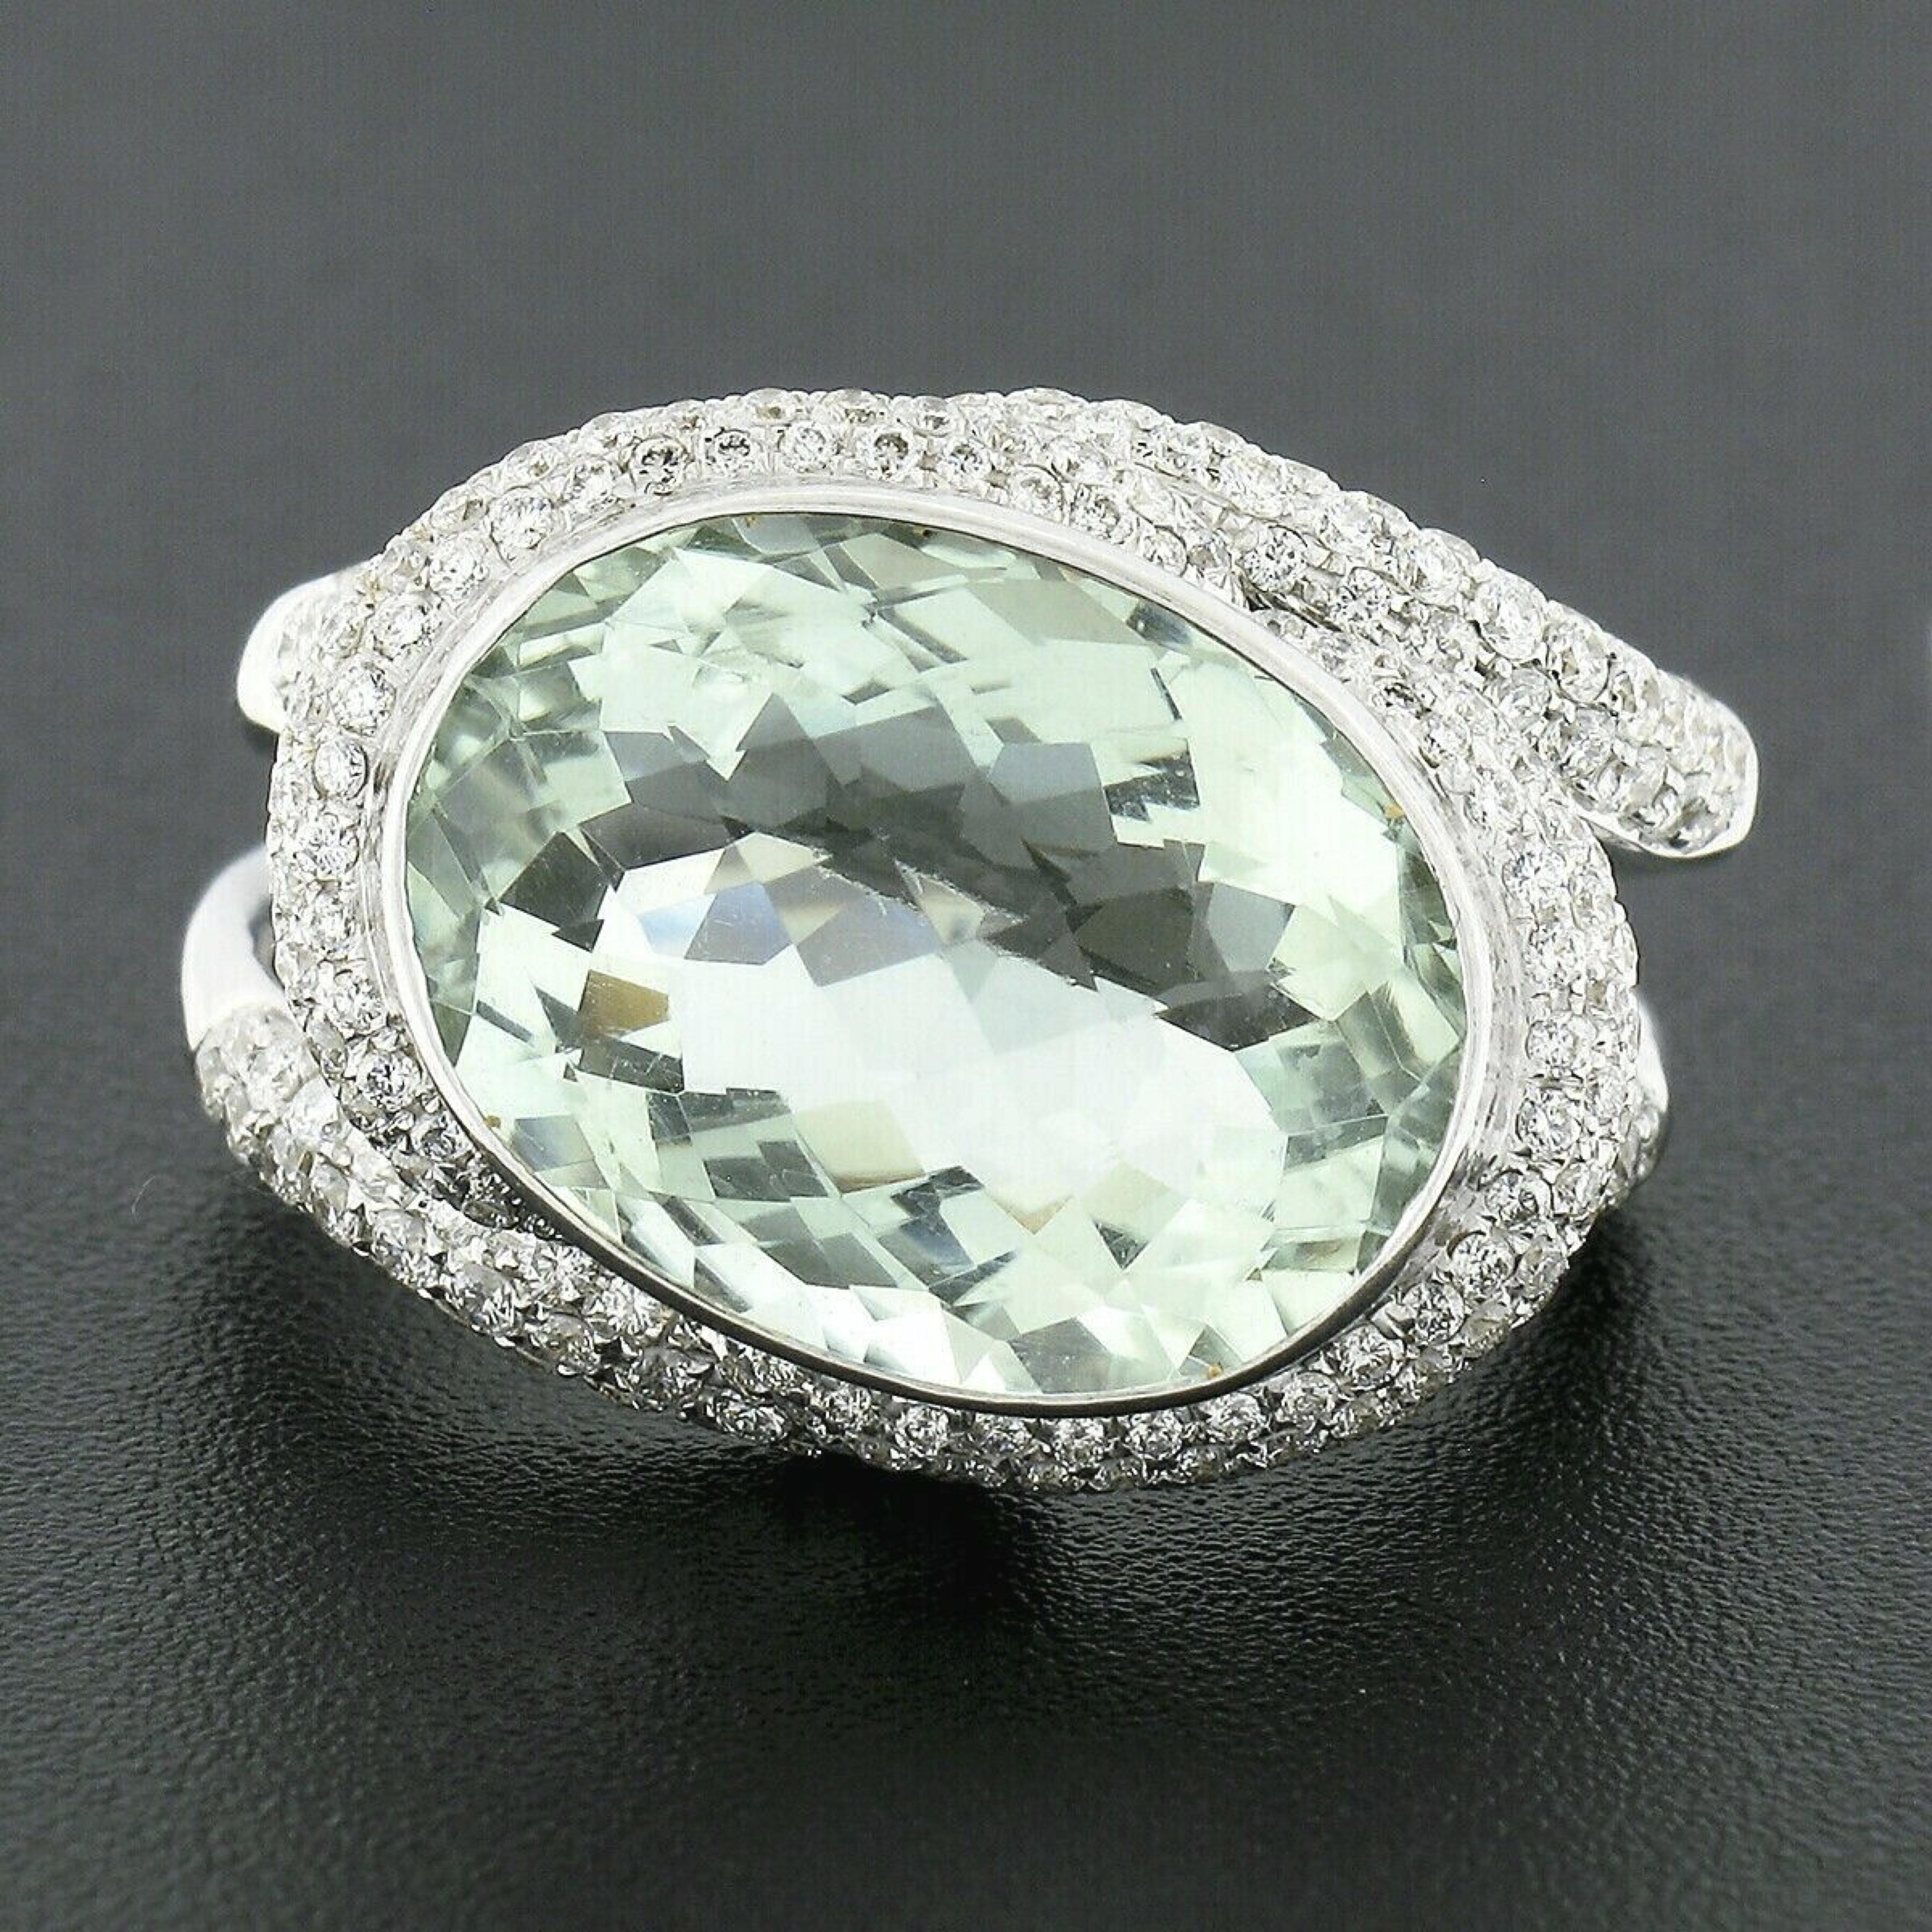 This breathtaking cocktail ring is crafted in solid 18k white gold and features a gorgeous oval cut prasiolite quartz neatly bezel set at the center. This large stone has a beautiful light mint green color that is very pleasant to observe and